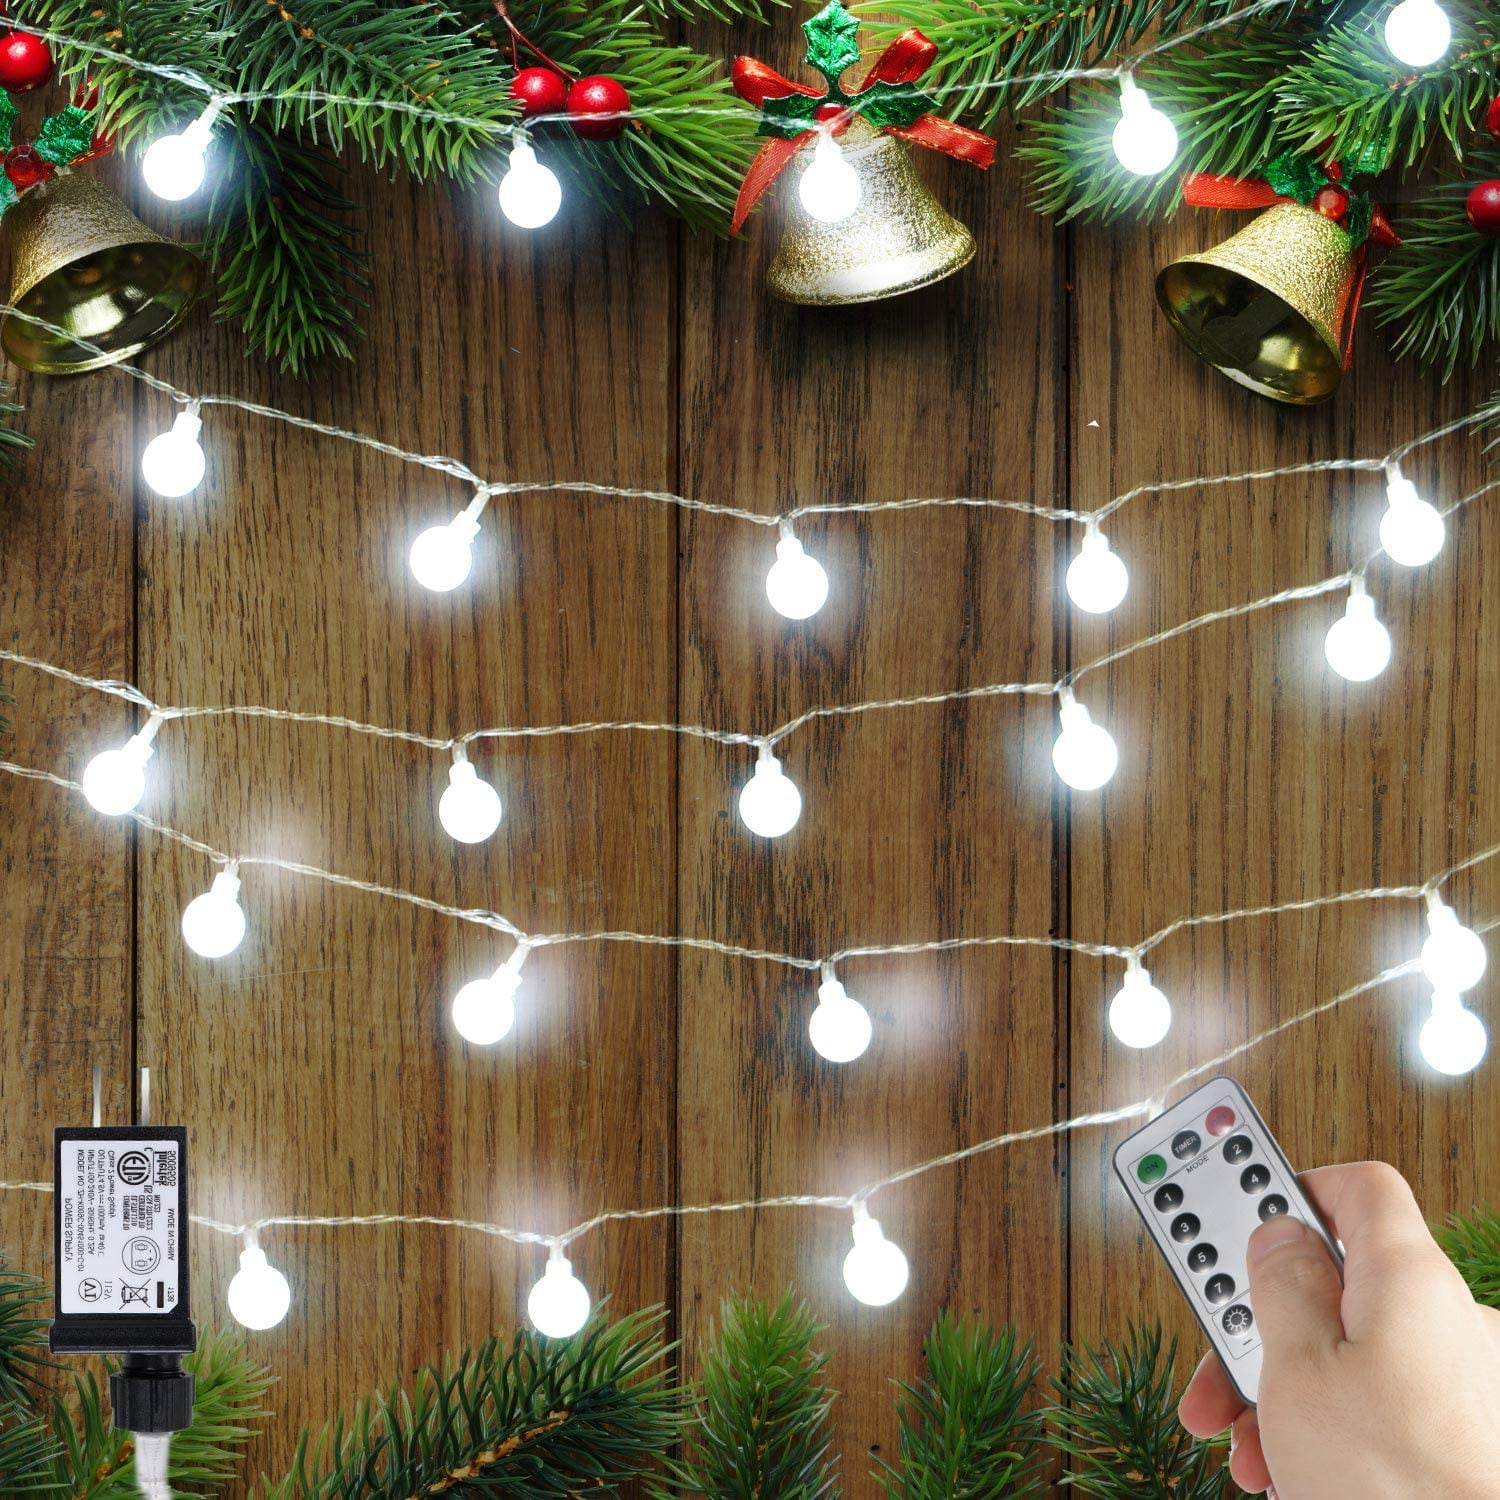 Christmas Tree LED String Lights Plug Waterproof For Party Garden Holiday Decor